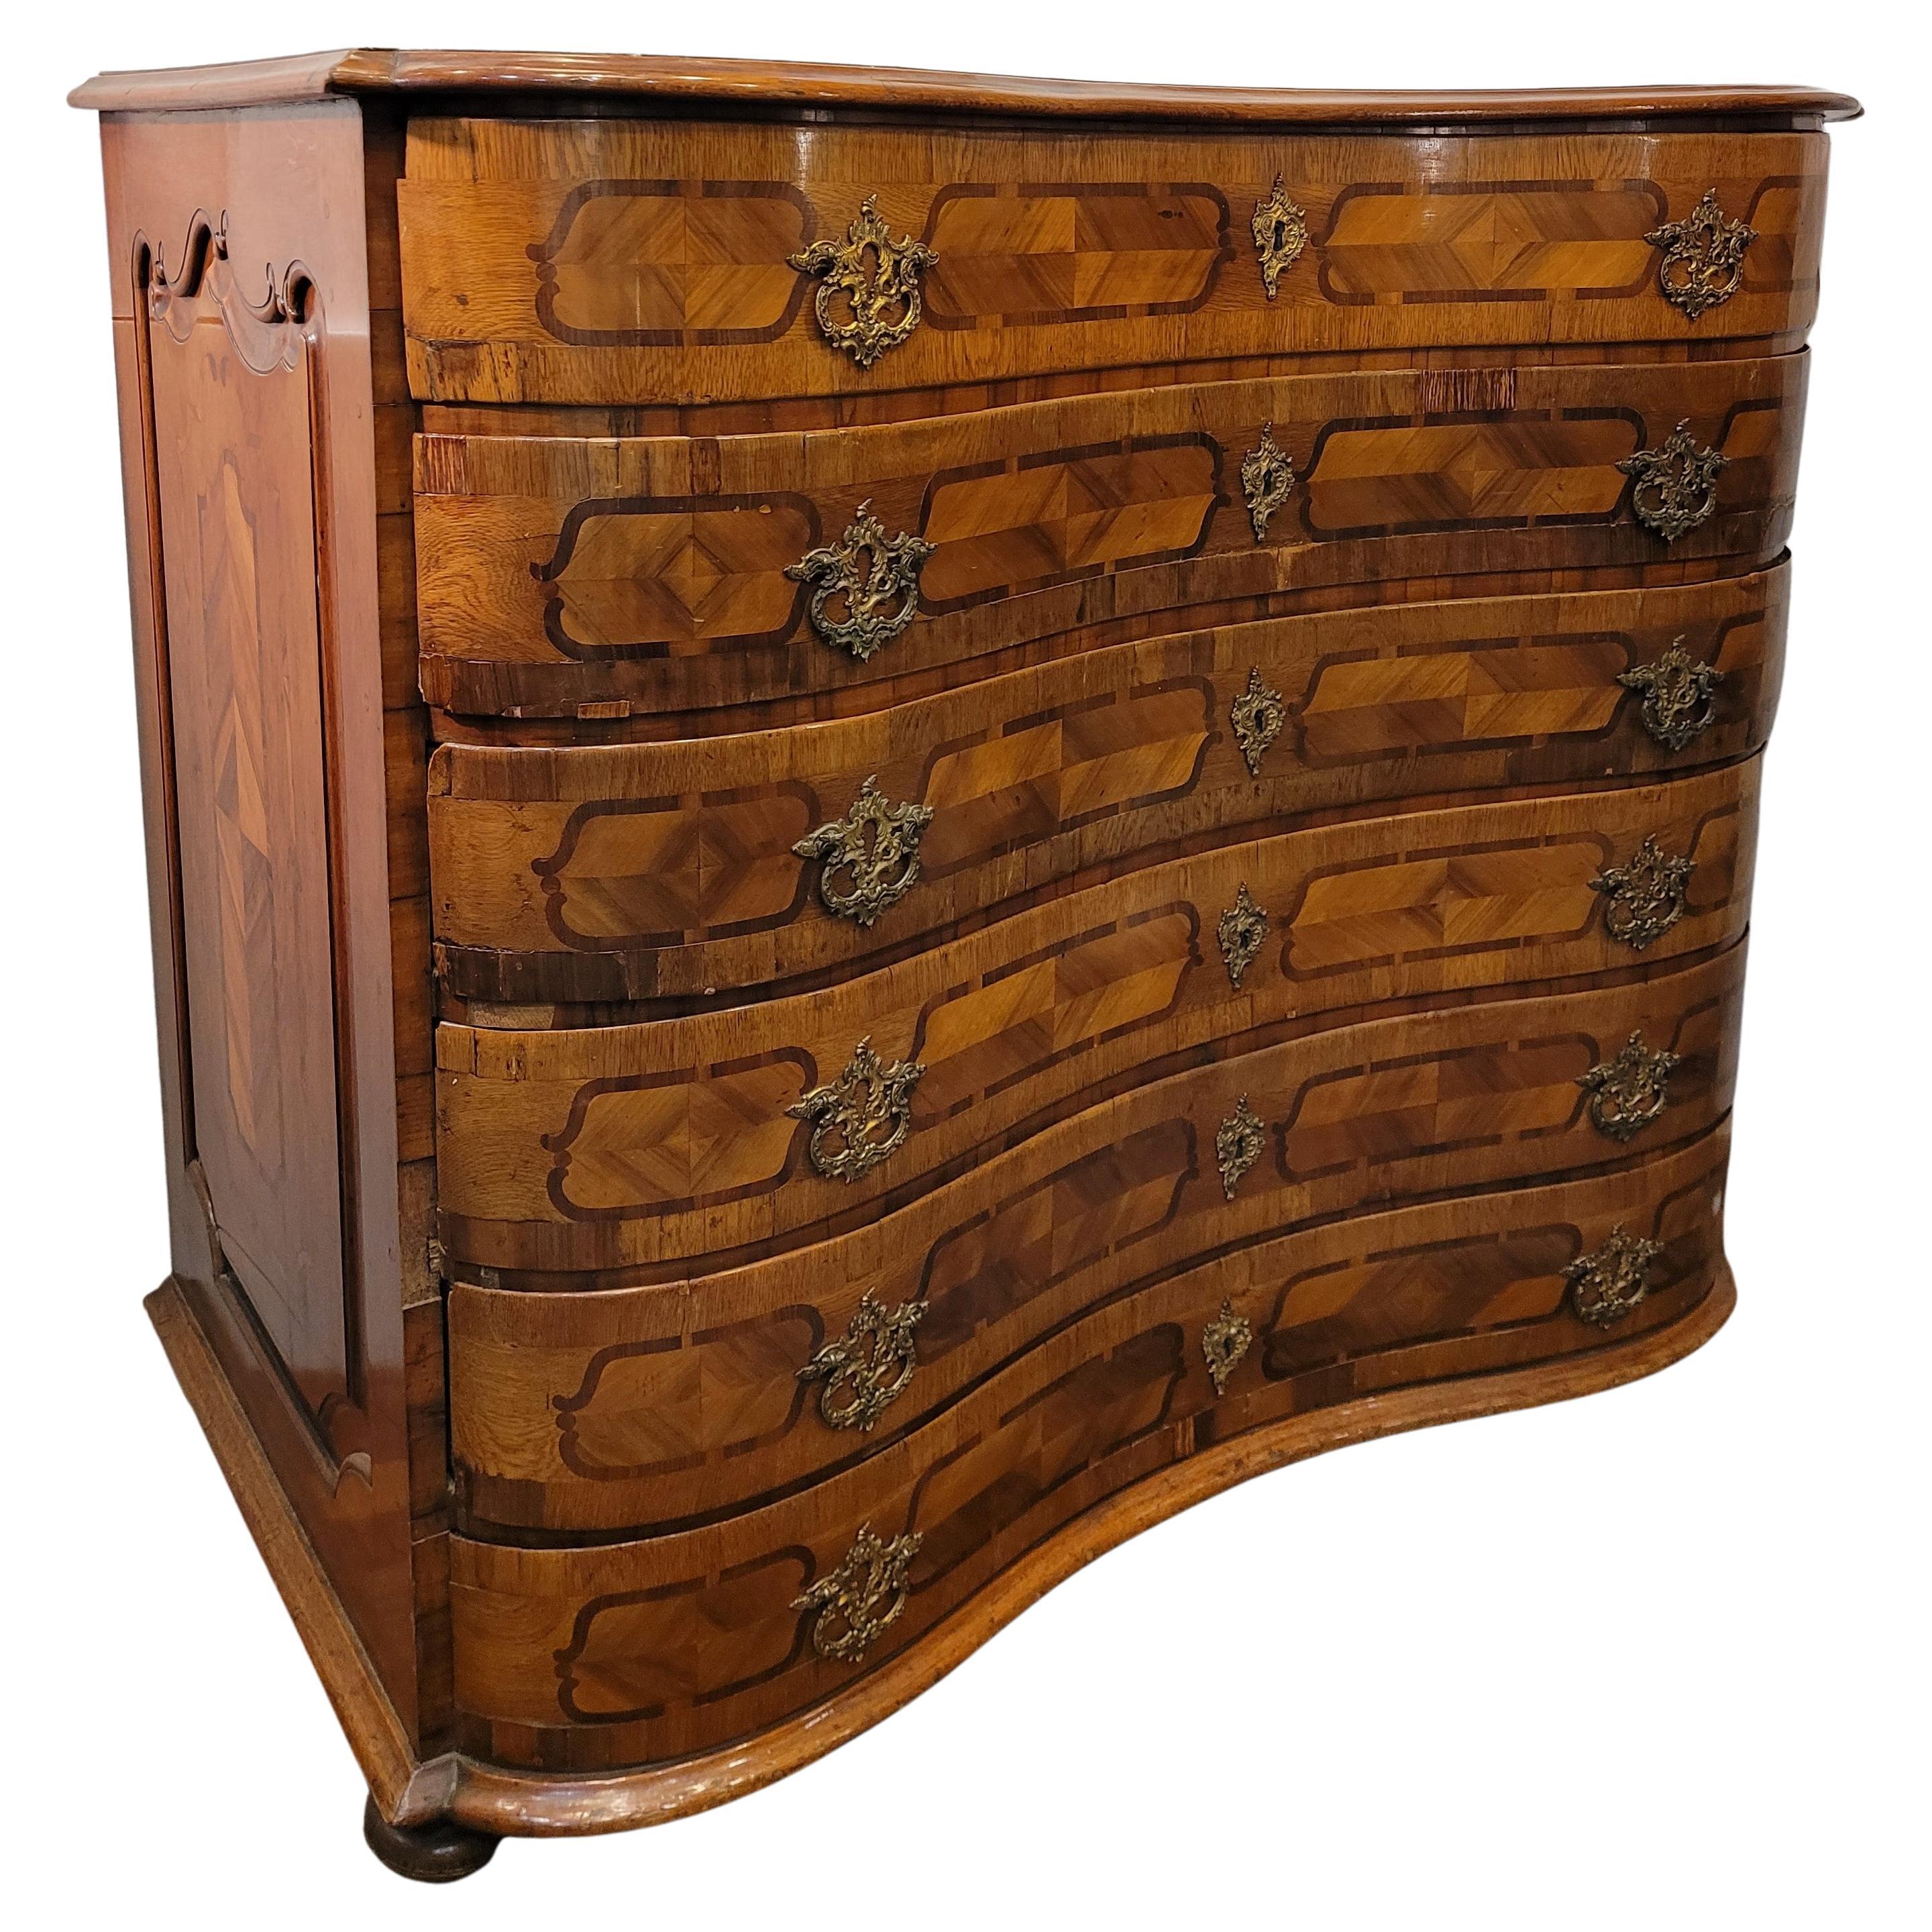 Germany BAROQUE BLACK FOREST 18 th century COMMODE CHEST OF DRAWERS